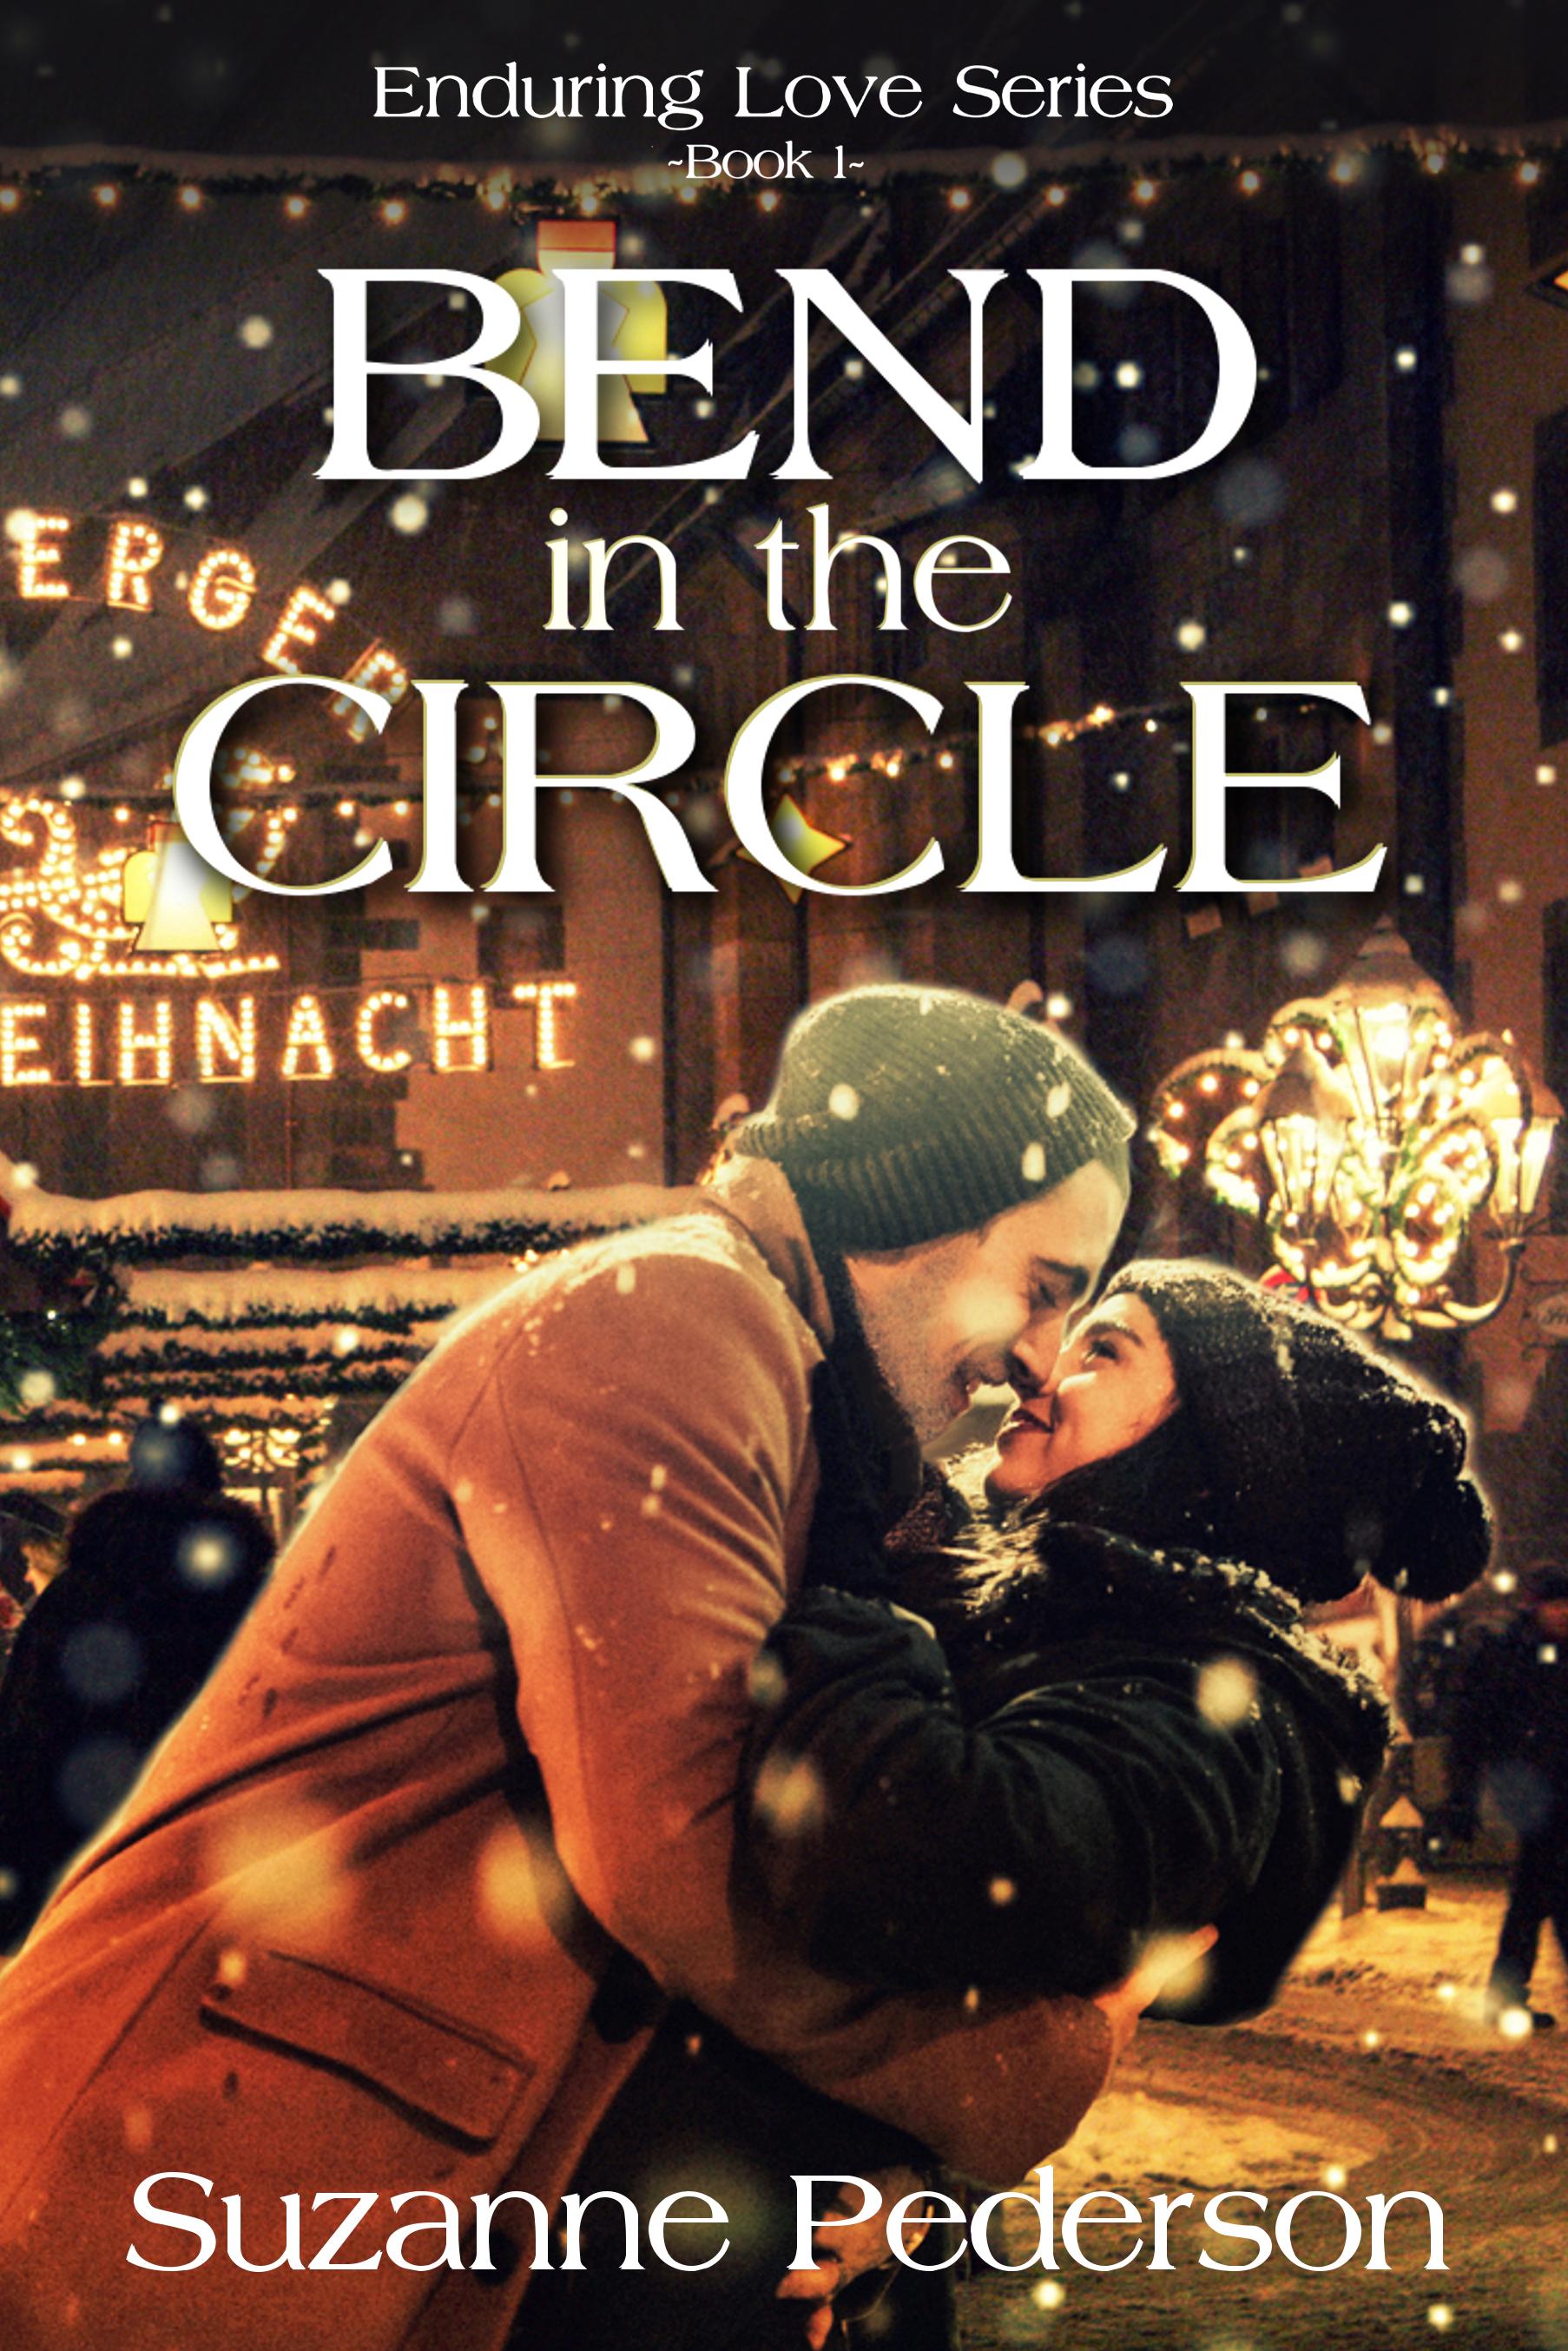 Bend in the Circle.  Available in ebook, paperback, and KU.